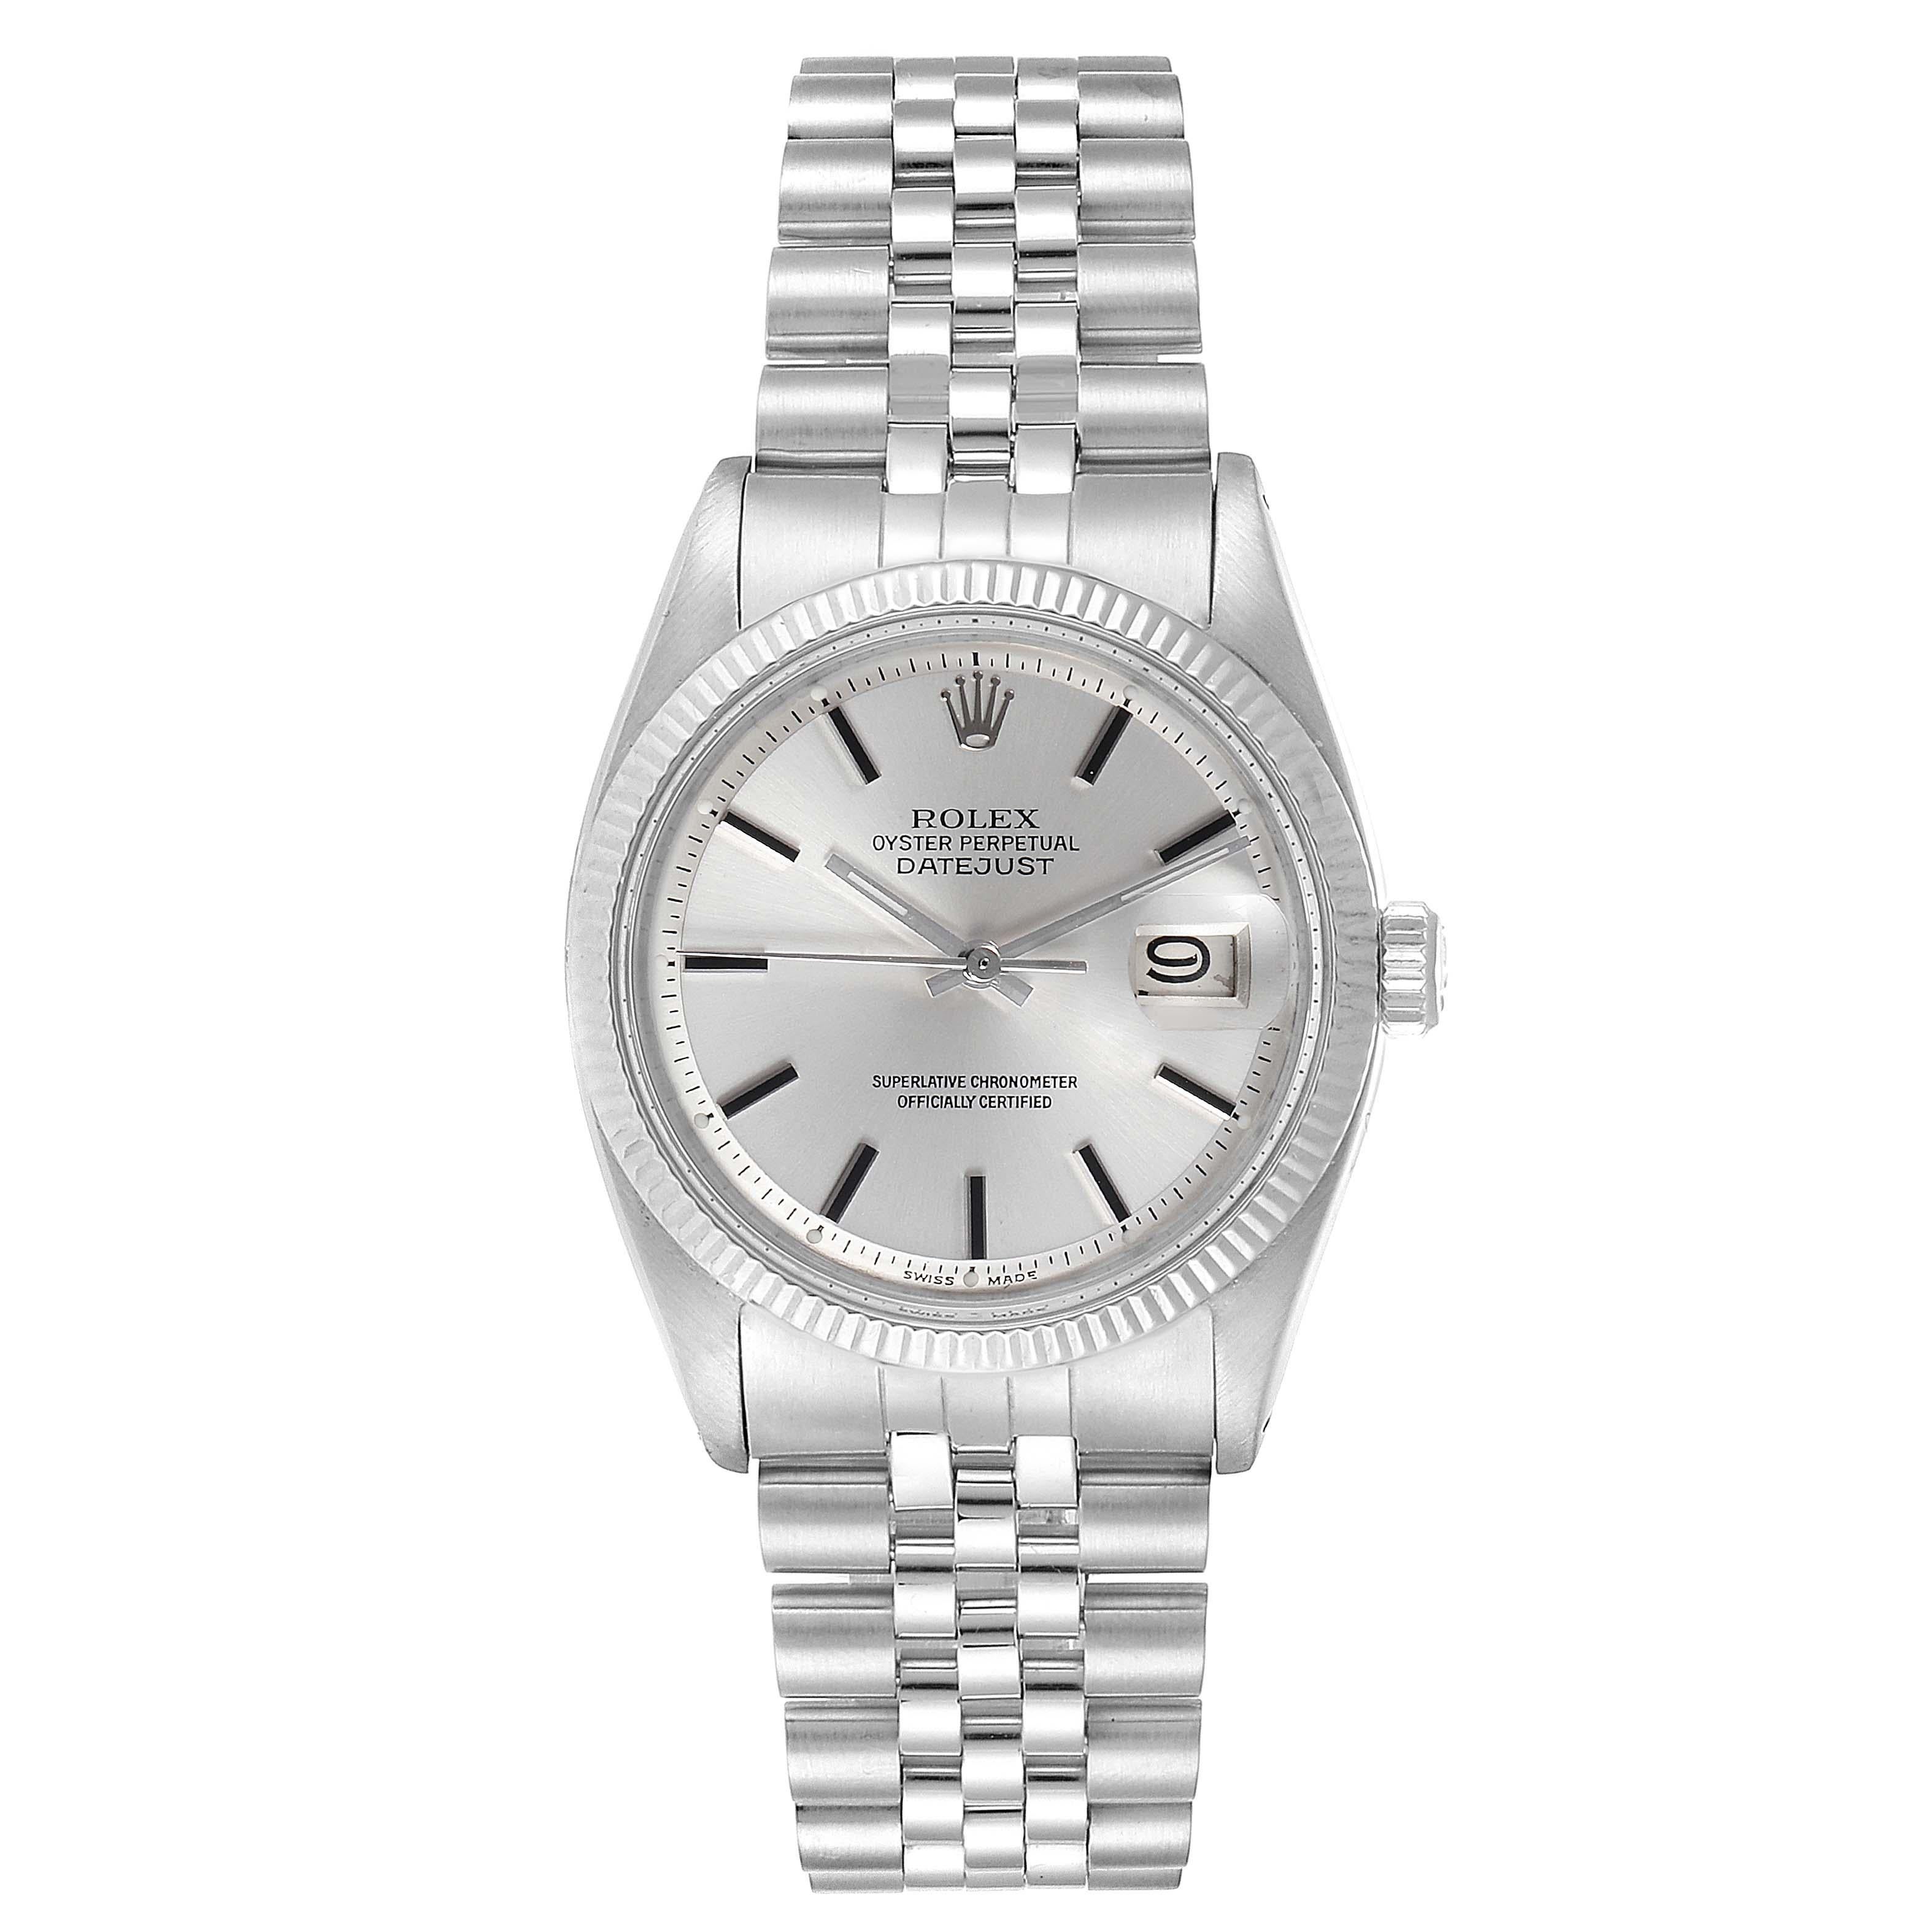 Rolex Datejust Steel White Gold Fluted Bezel Vintage Steel Watch 1601. Officially certified chronometer self-winding movement. Stainless steel oyster case 36 mm in diameter. Rolex logo on a crown. 18k white gold fluted bezel. Acrylic crystal with